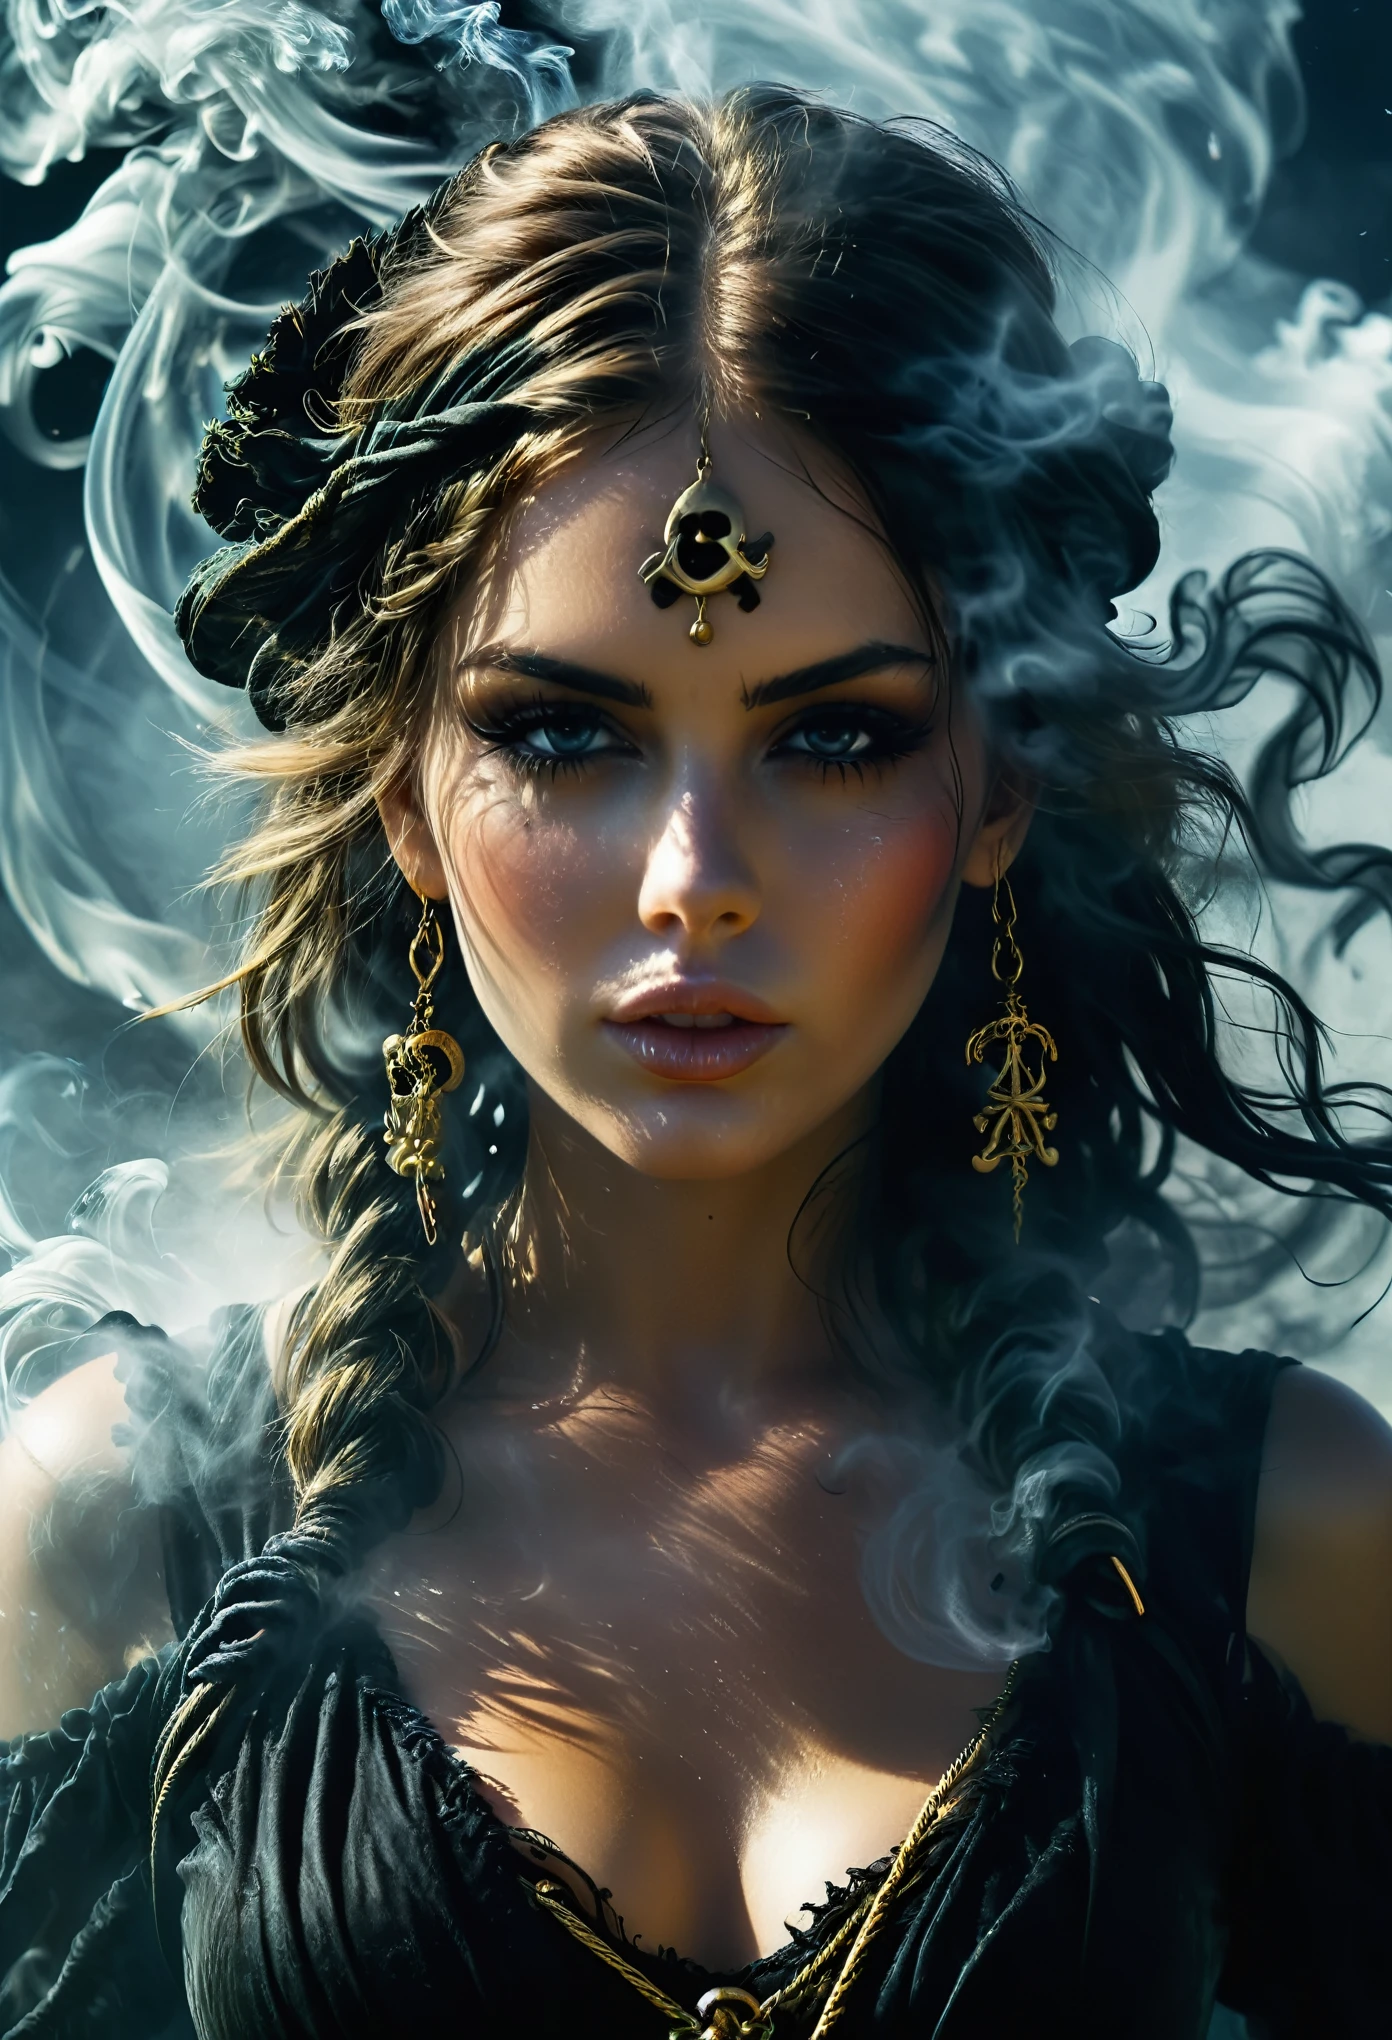 DonM3l3m3nt4lXL, Pirate girl made of smoke, swirling water around ,perfect face